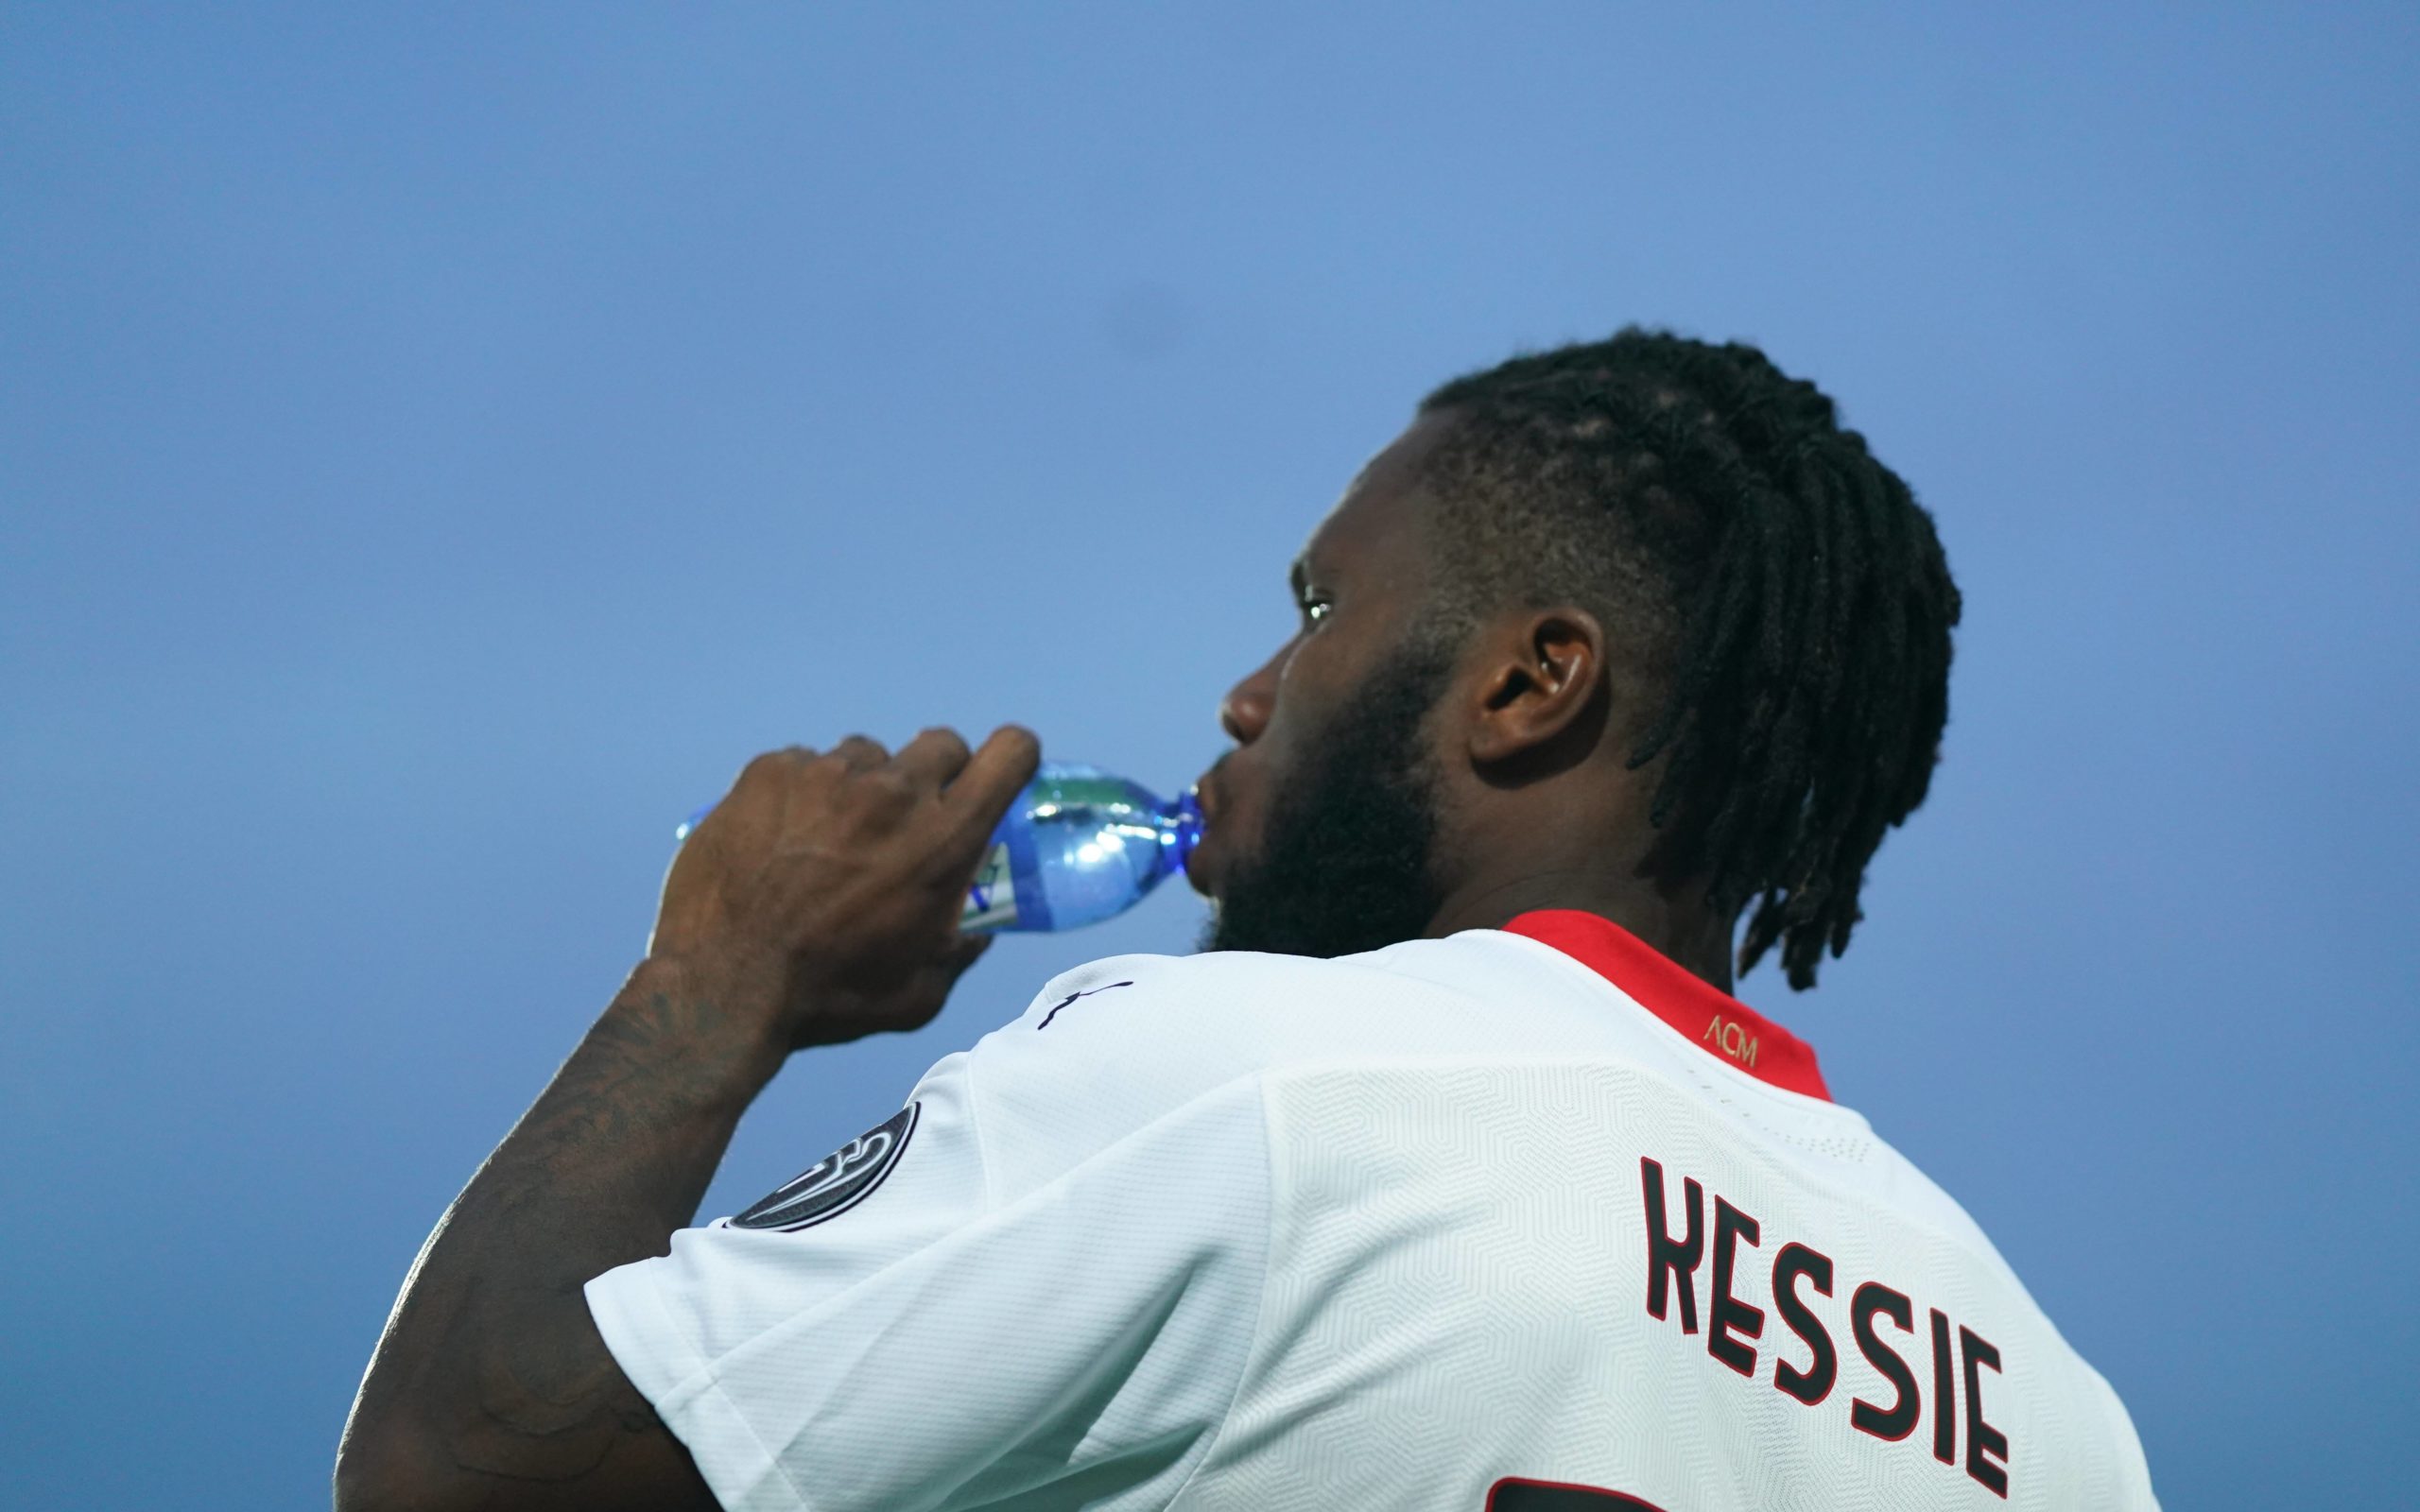 Liverpool have set their sights on Kessie who is seen in the picture